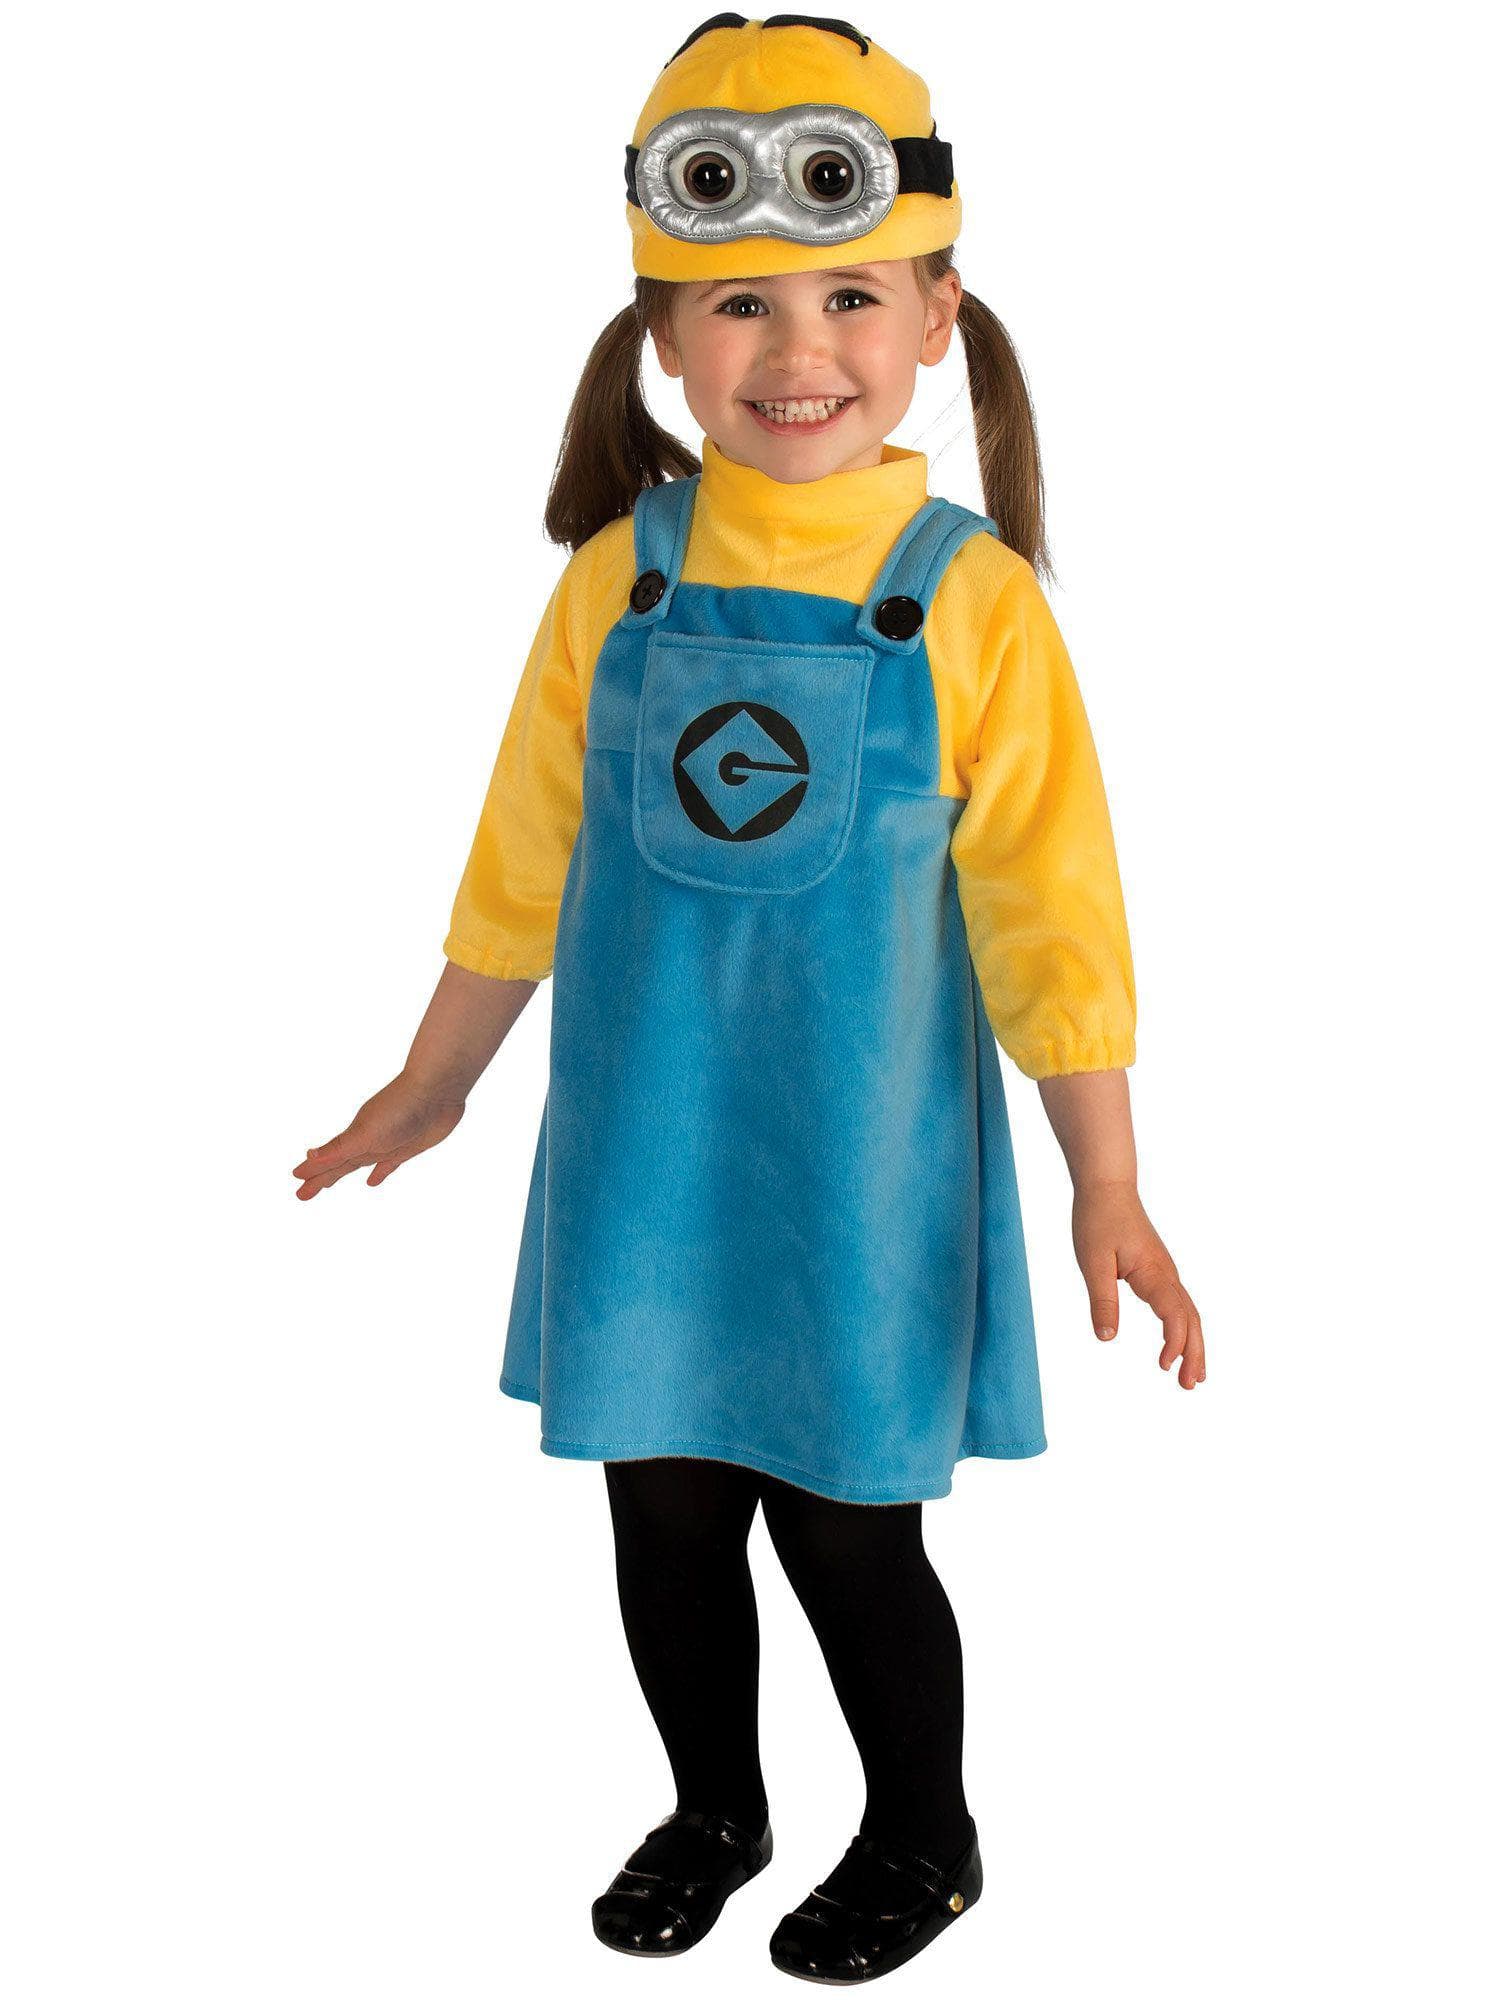 Baby/Toddler Despicable Me Minions Costume - costumes.com